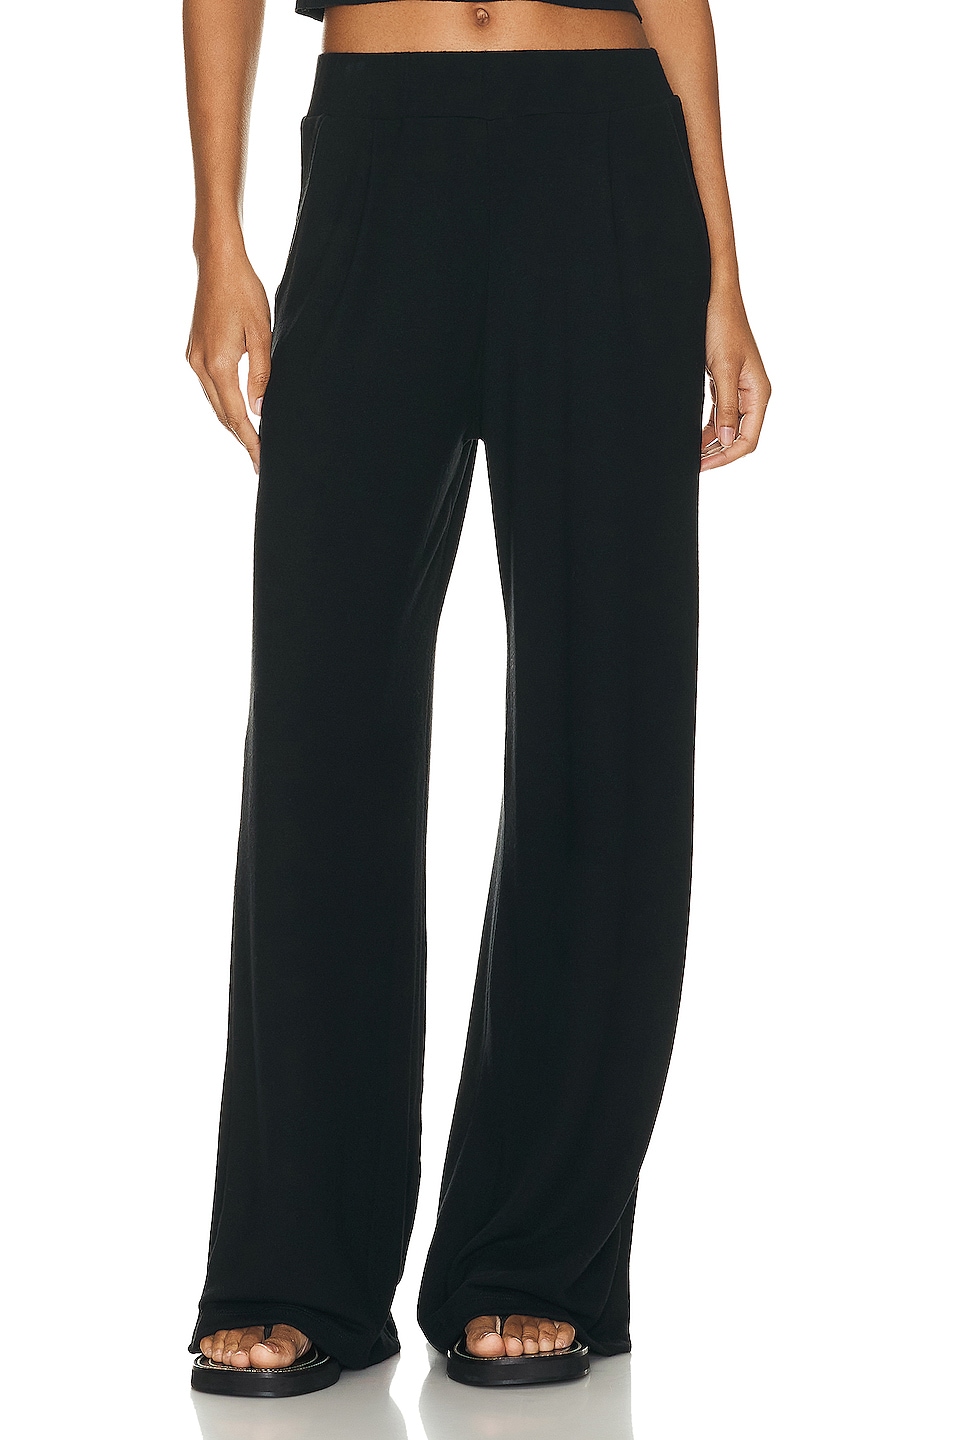 Designer Pants for Women | Leather, Trousers, Printed